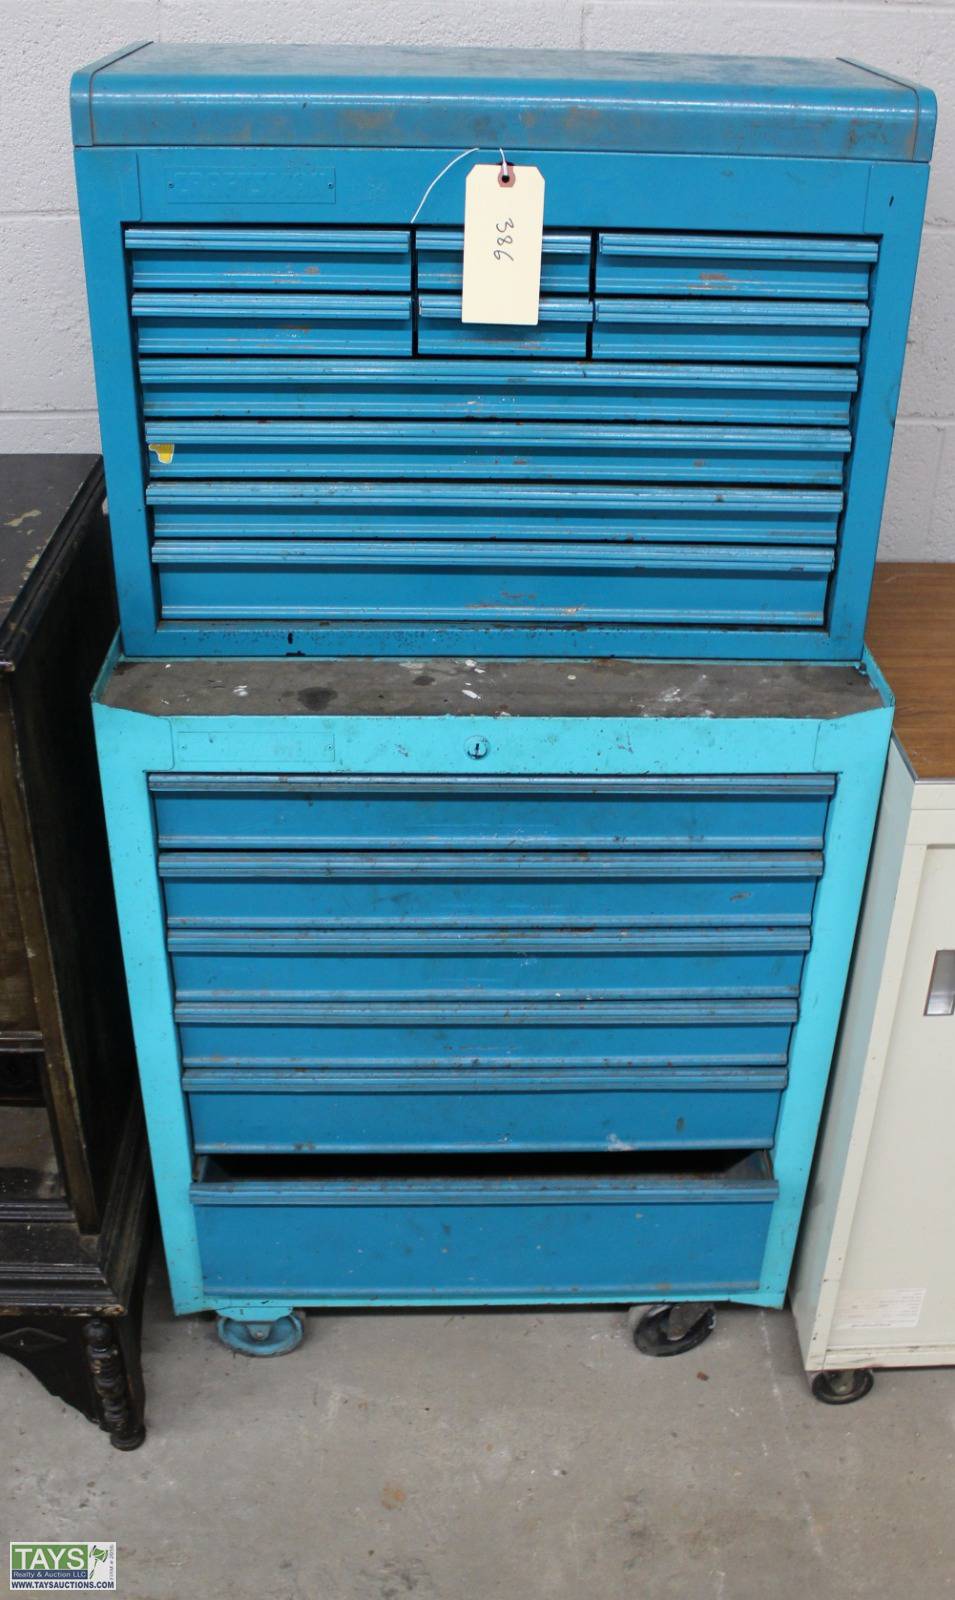 Tays Realty & Auction - Auction: ONLINE ABSOLUTE AUCTION: FURNITURE - TOOLS  - SHOP EQUIPMENT ITEM: Craftsman Tool Box With Some Tools and Hardware